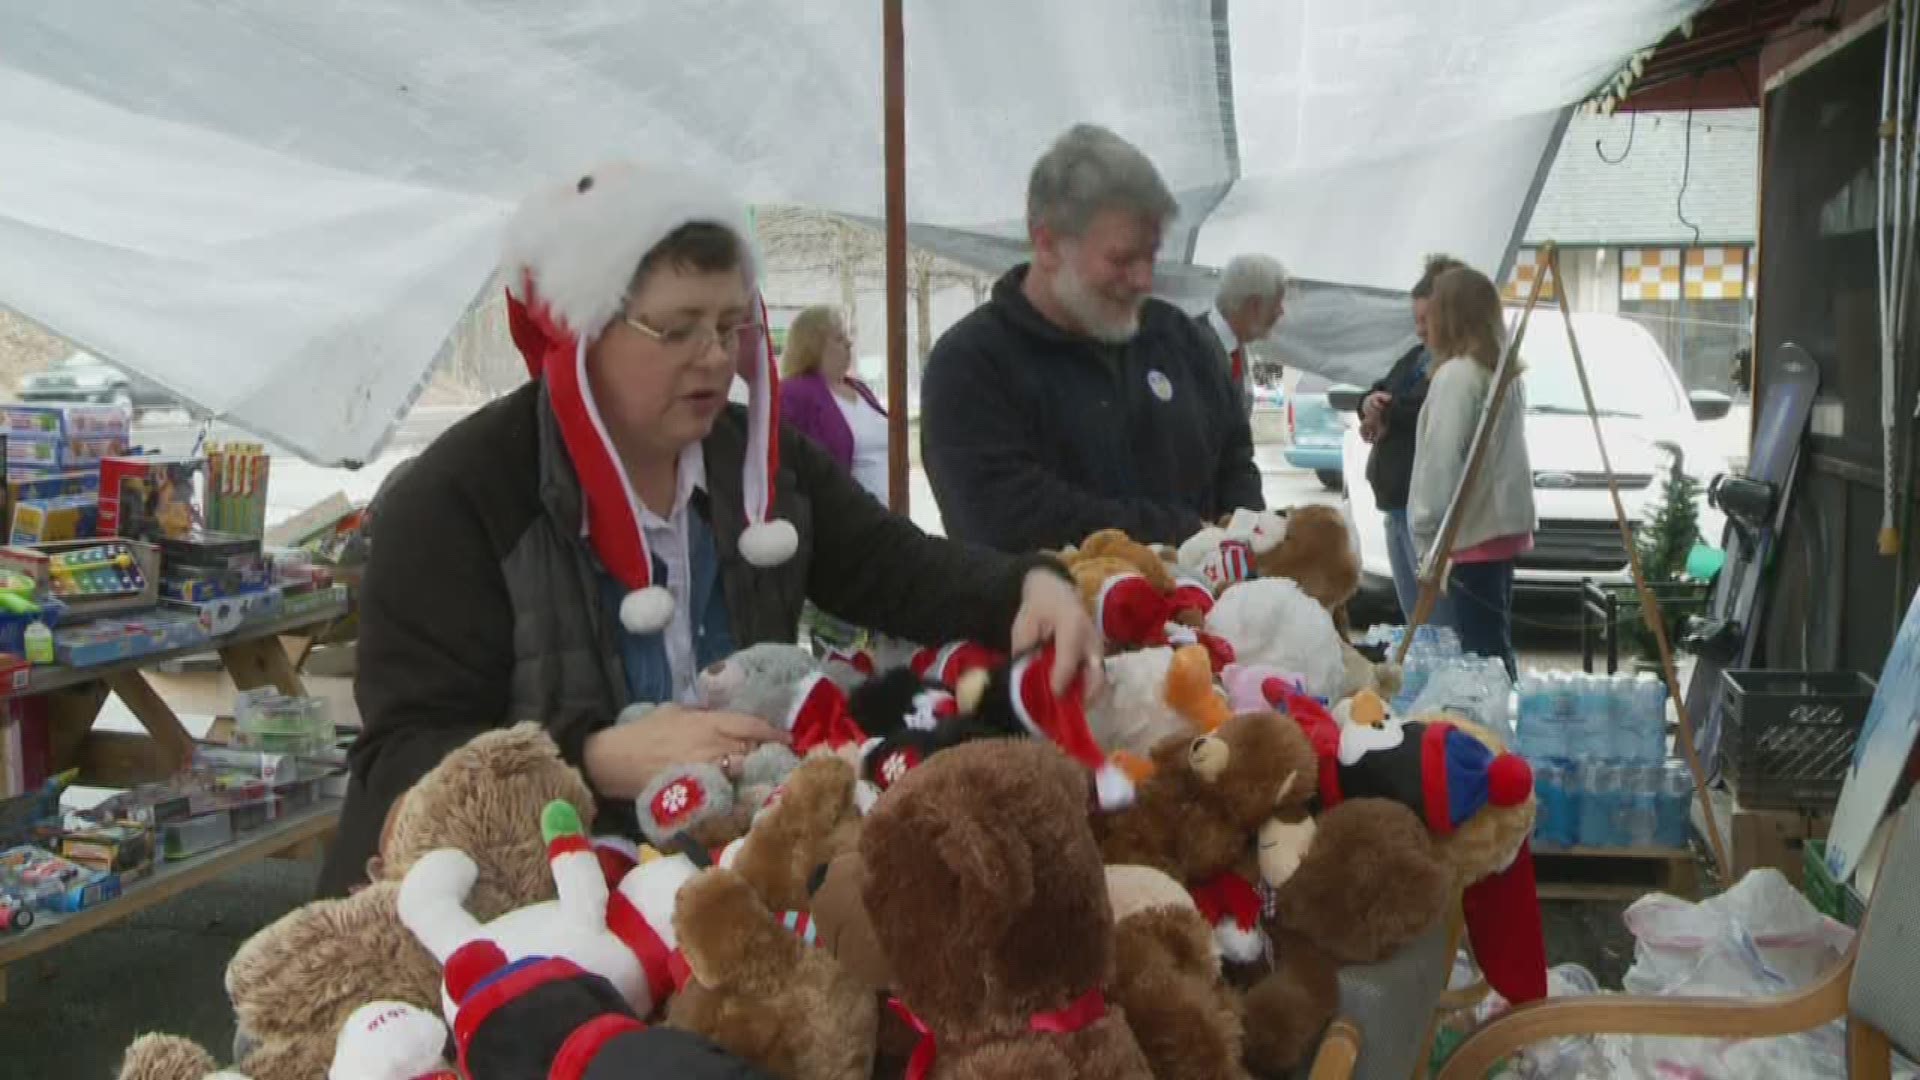 A Virginia couple brought more than 1,000 stuffed animals to Gatlinburg to bring gifts to wildfire victims. (12/24/16 6PM)